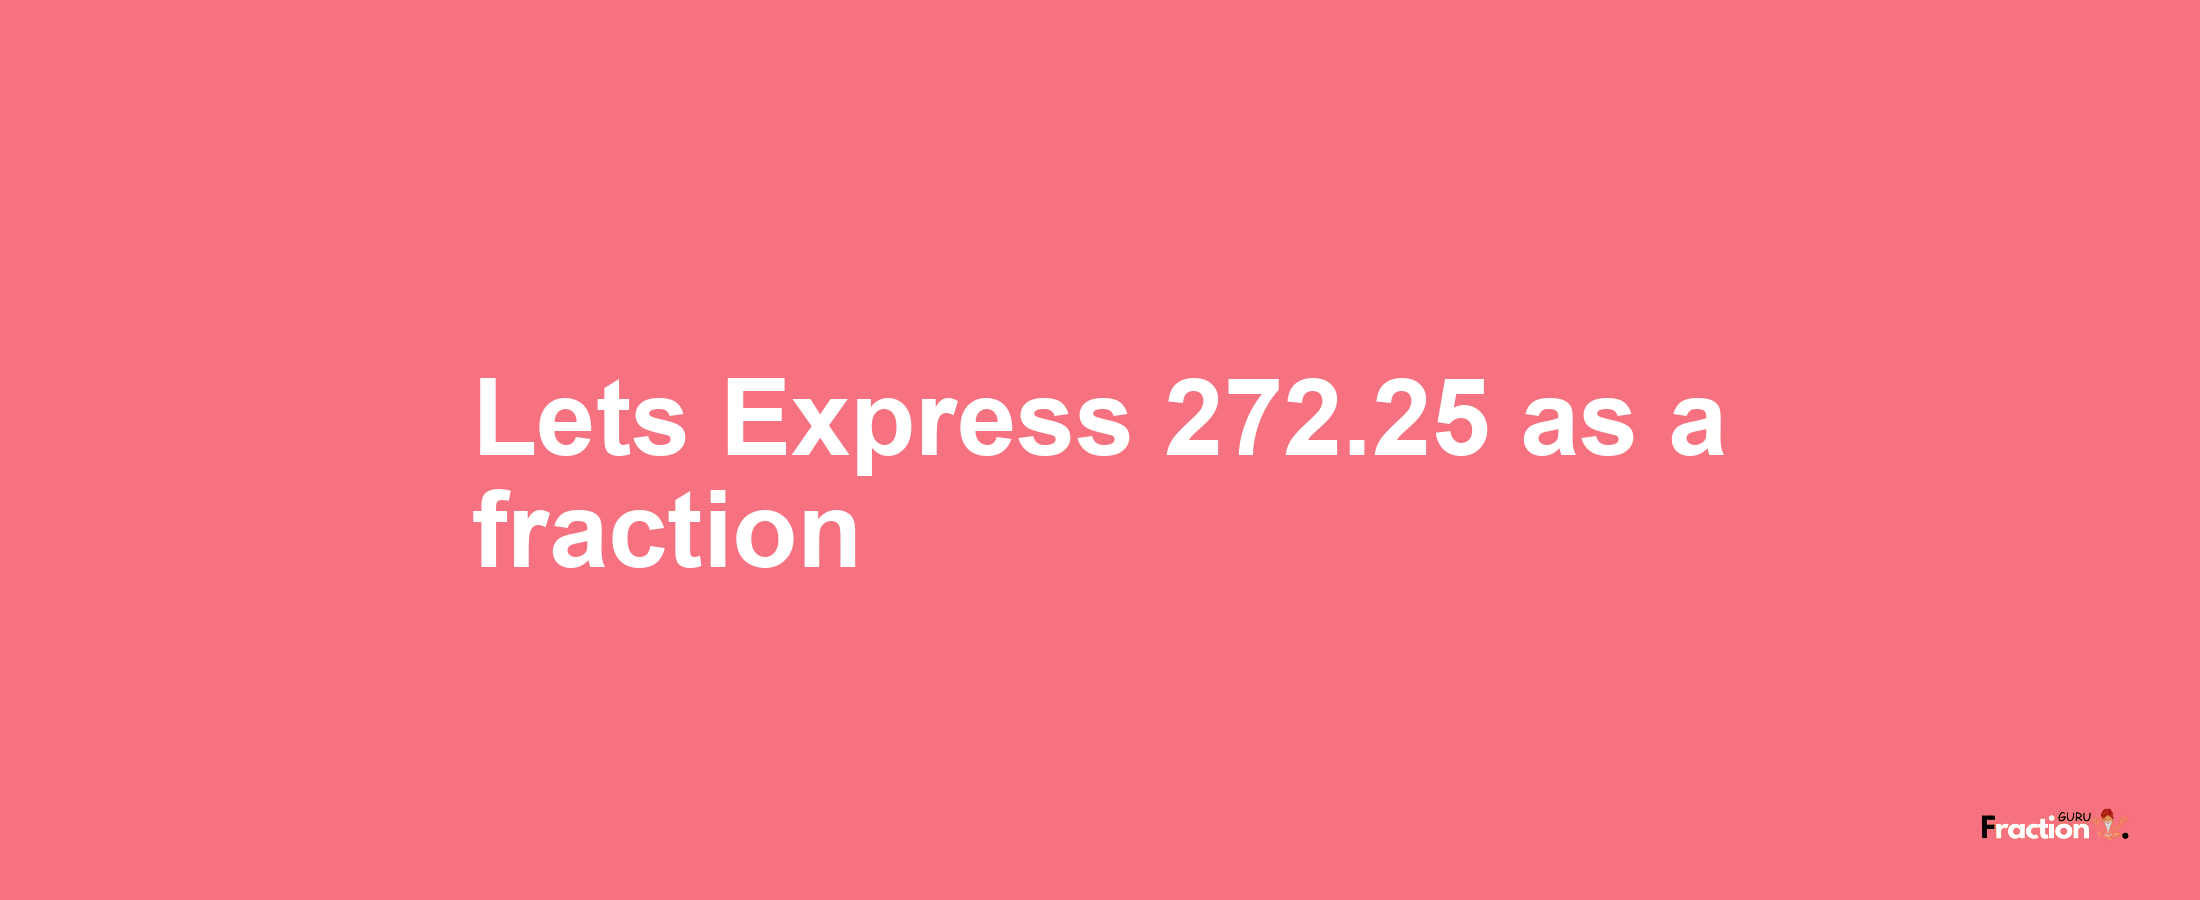 Lets Express 272.25 as afraction